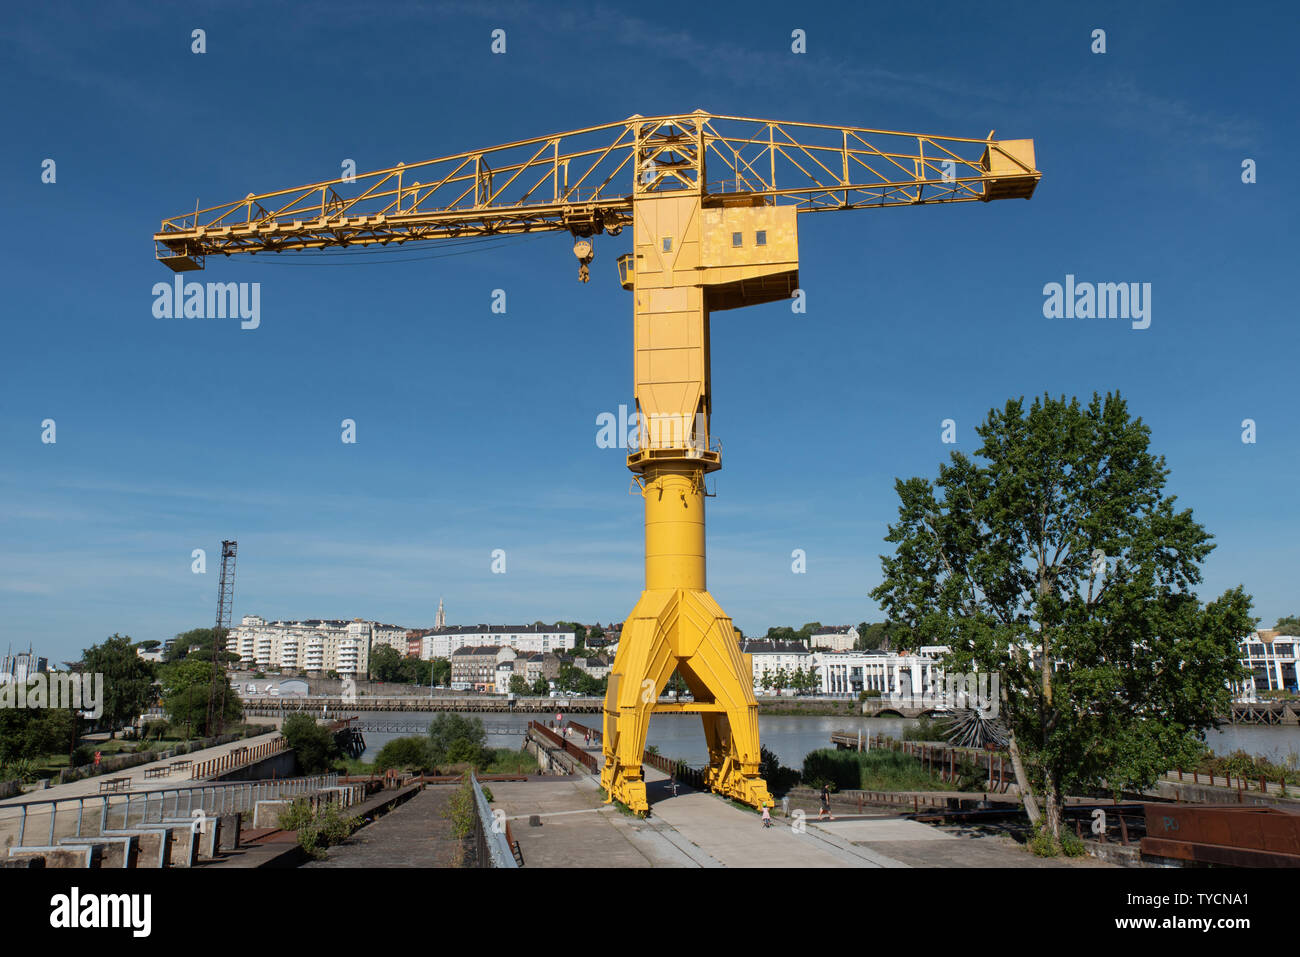 The Titan cranes are 2 cranes now decommissioned on the western tip of the island of Nantes, preserved in testimony of the industrial past of Nantes. Stock Photo